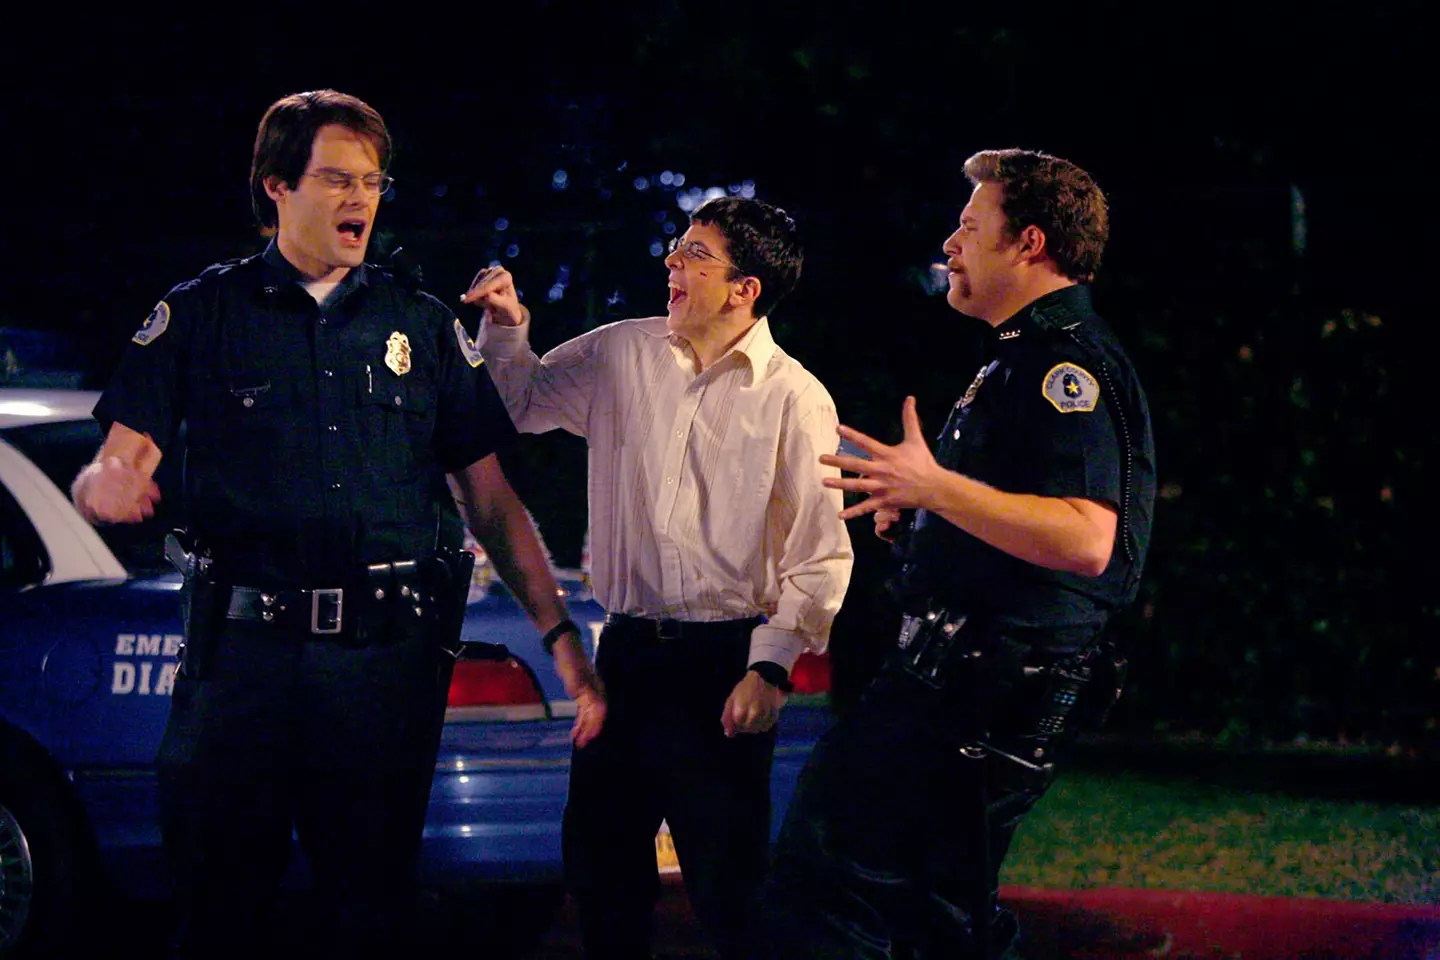 Seth Rogen has said he finds it 'f***ed up' that people wanted to become cops after watching Superbad.